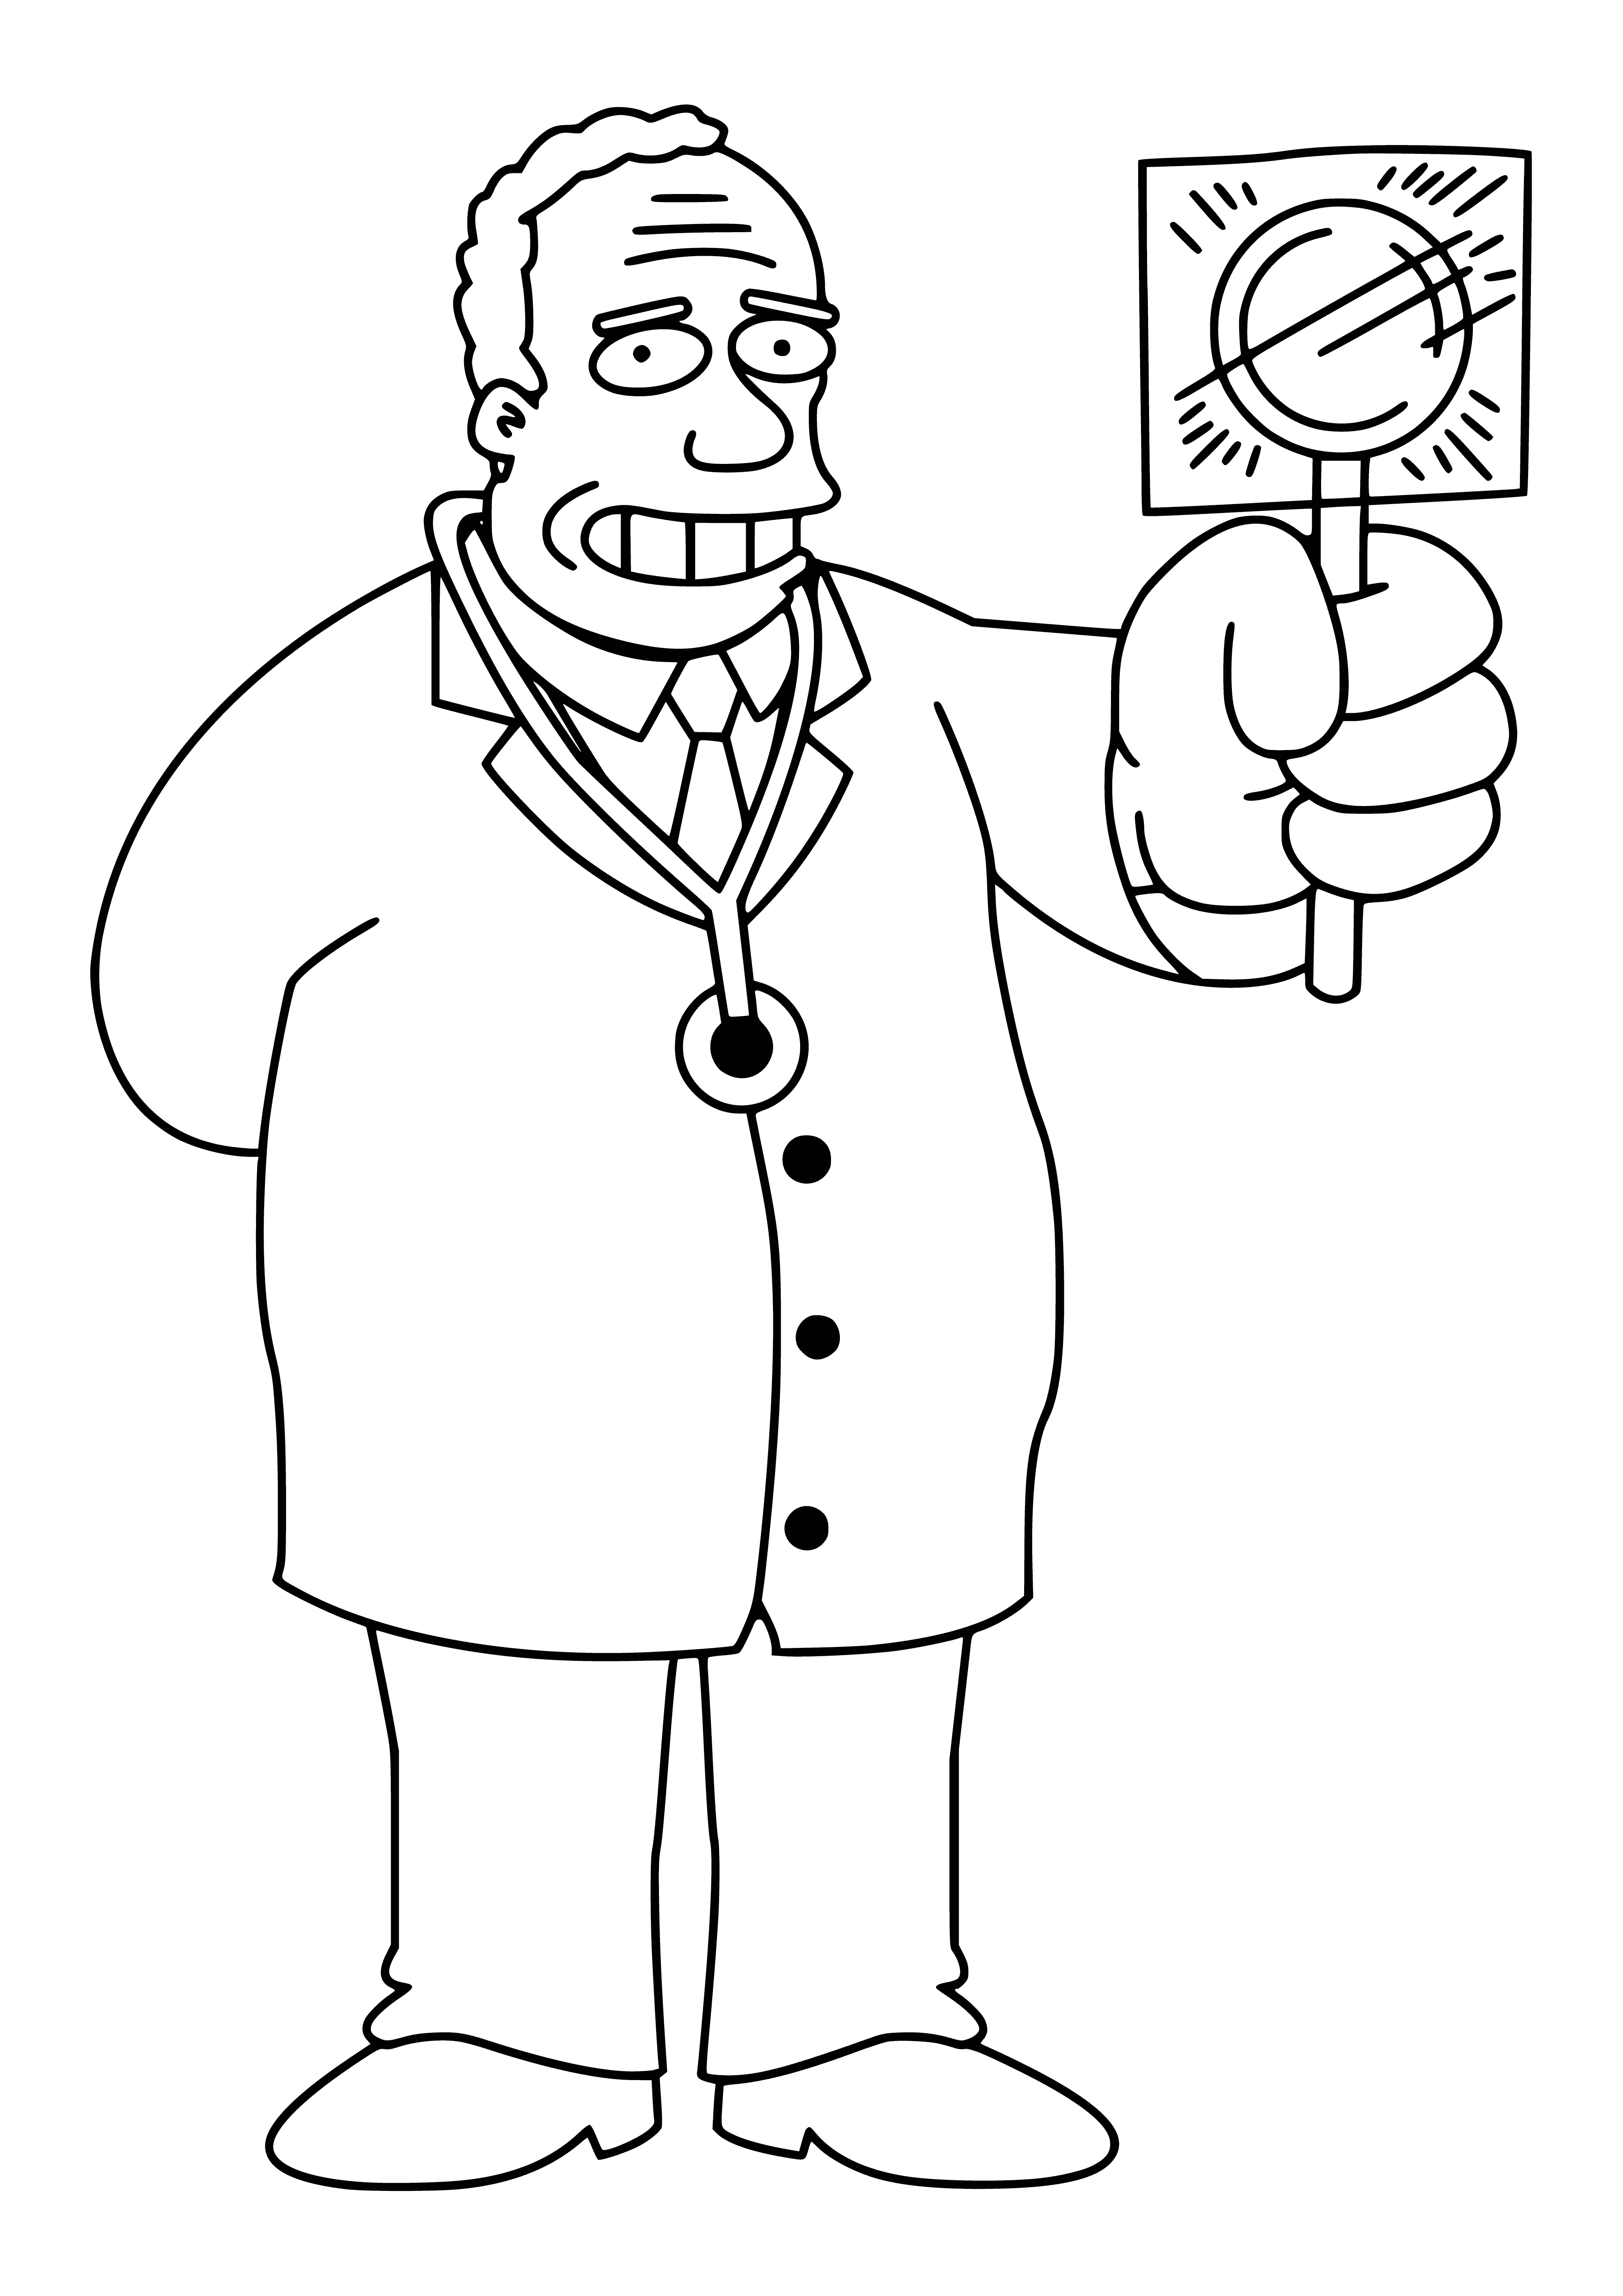 The Simpsons Family Doctor Julius Hibbert coloring page